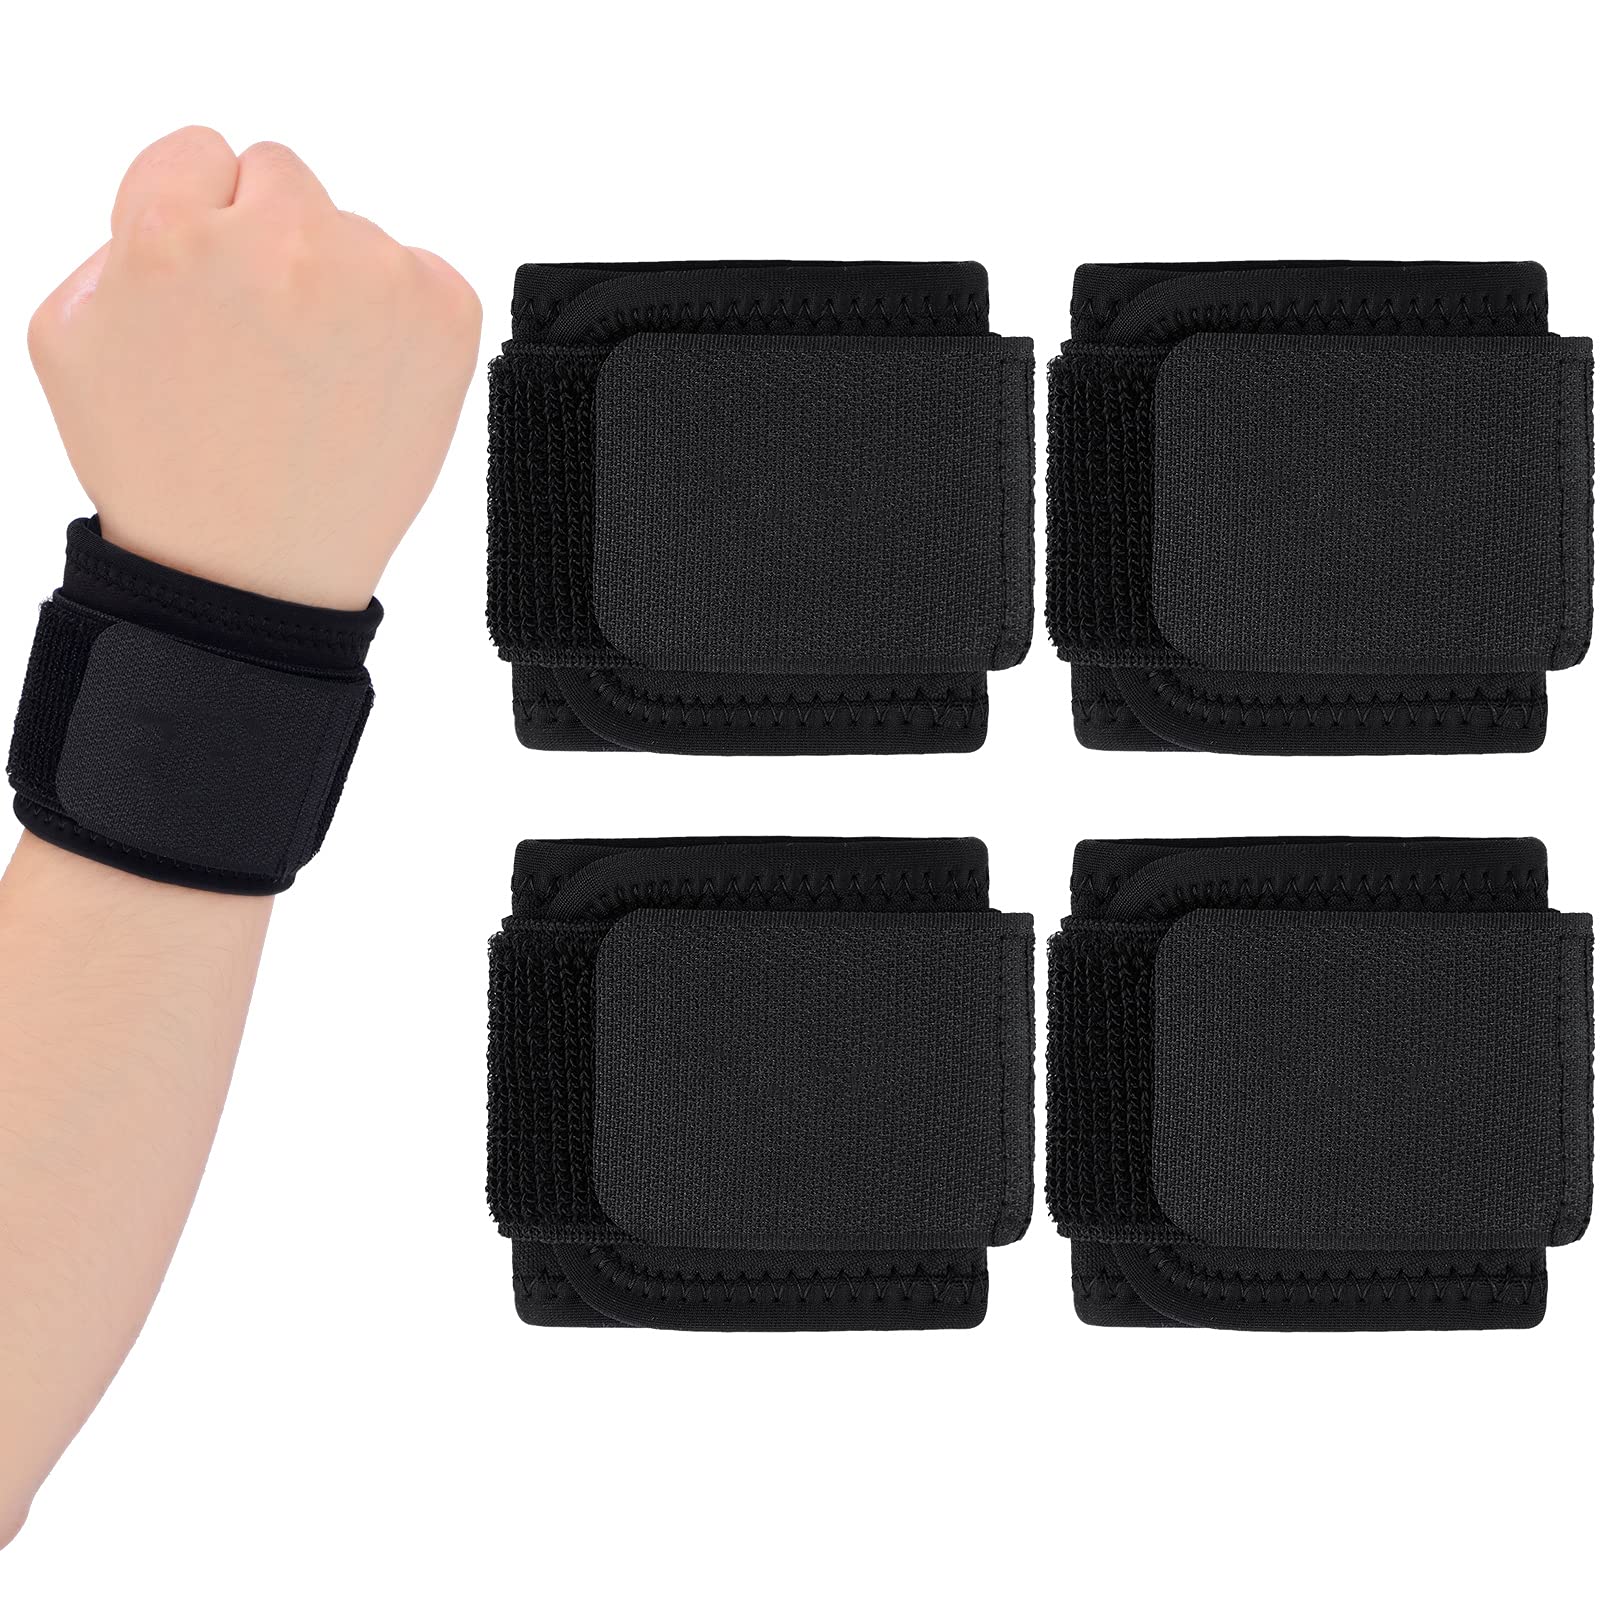 4 Pieces Wrist Wrap Adjustable Wrist Brace Splint Support Wrist Strap  Carpal Tunnel Wrist Brace Right and Left Hands Wrist Guard for Men and  Women Sports Weightlifting 16.5 x 3.1 Inches